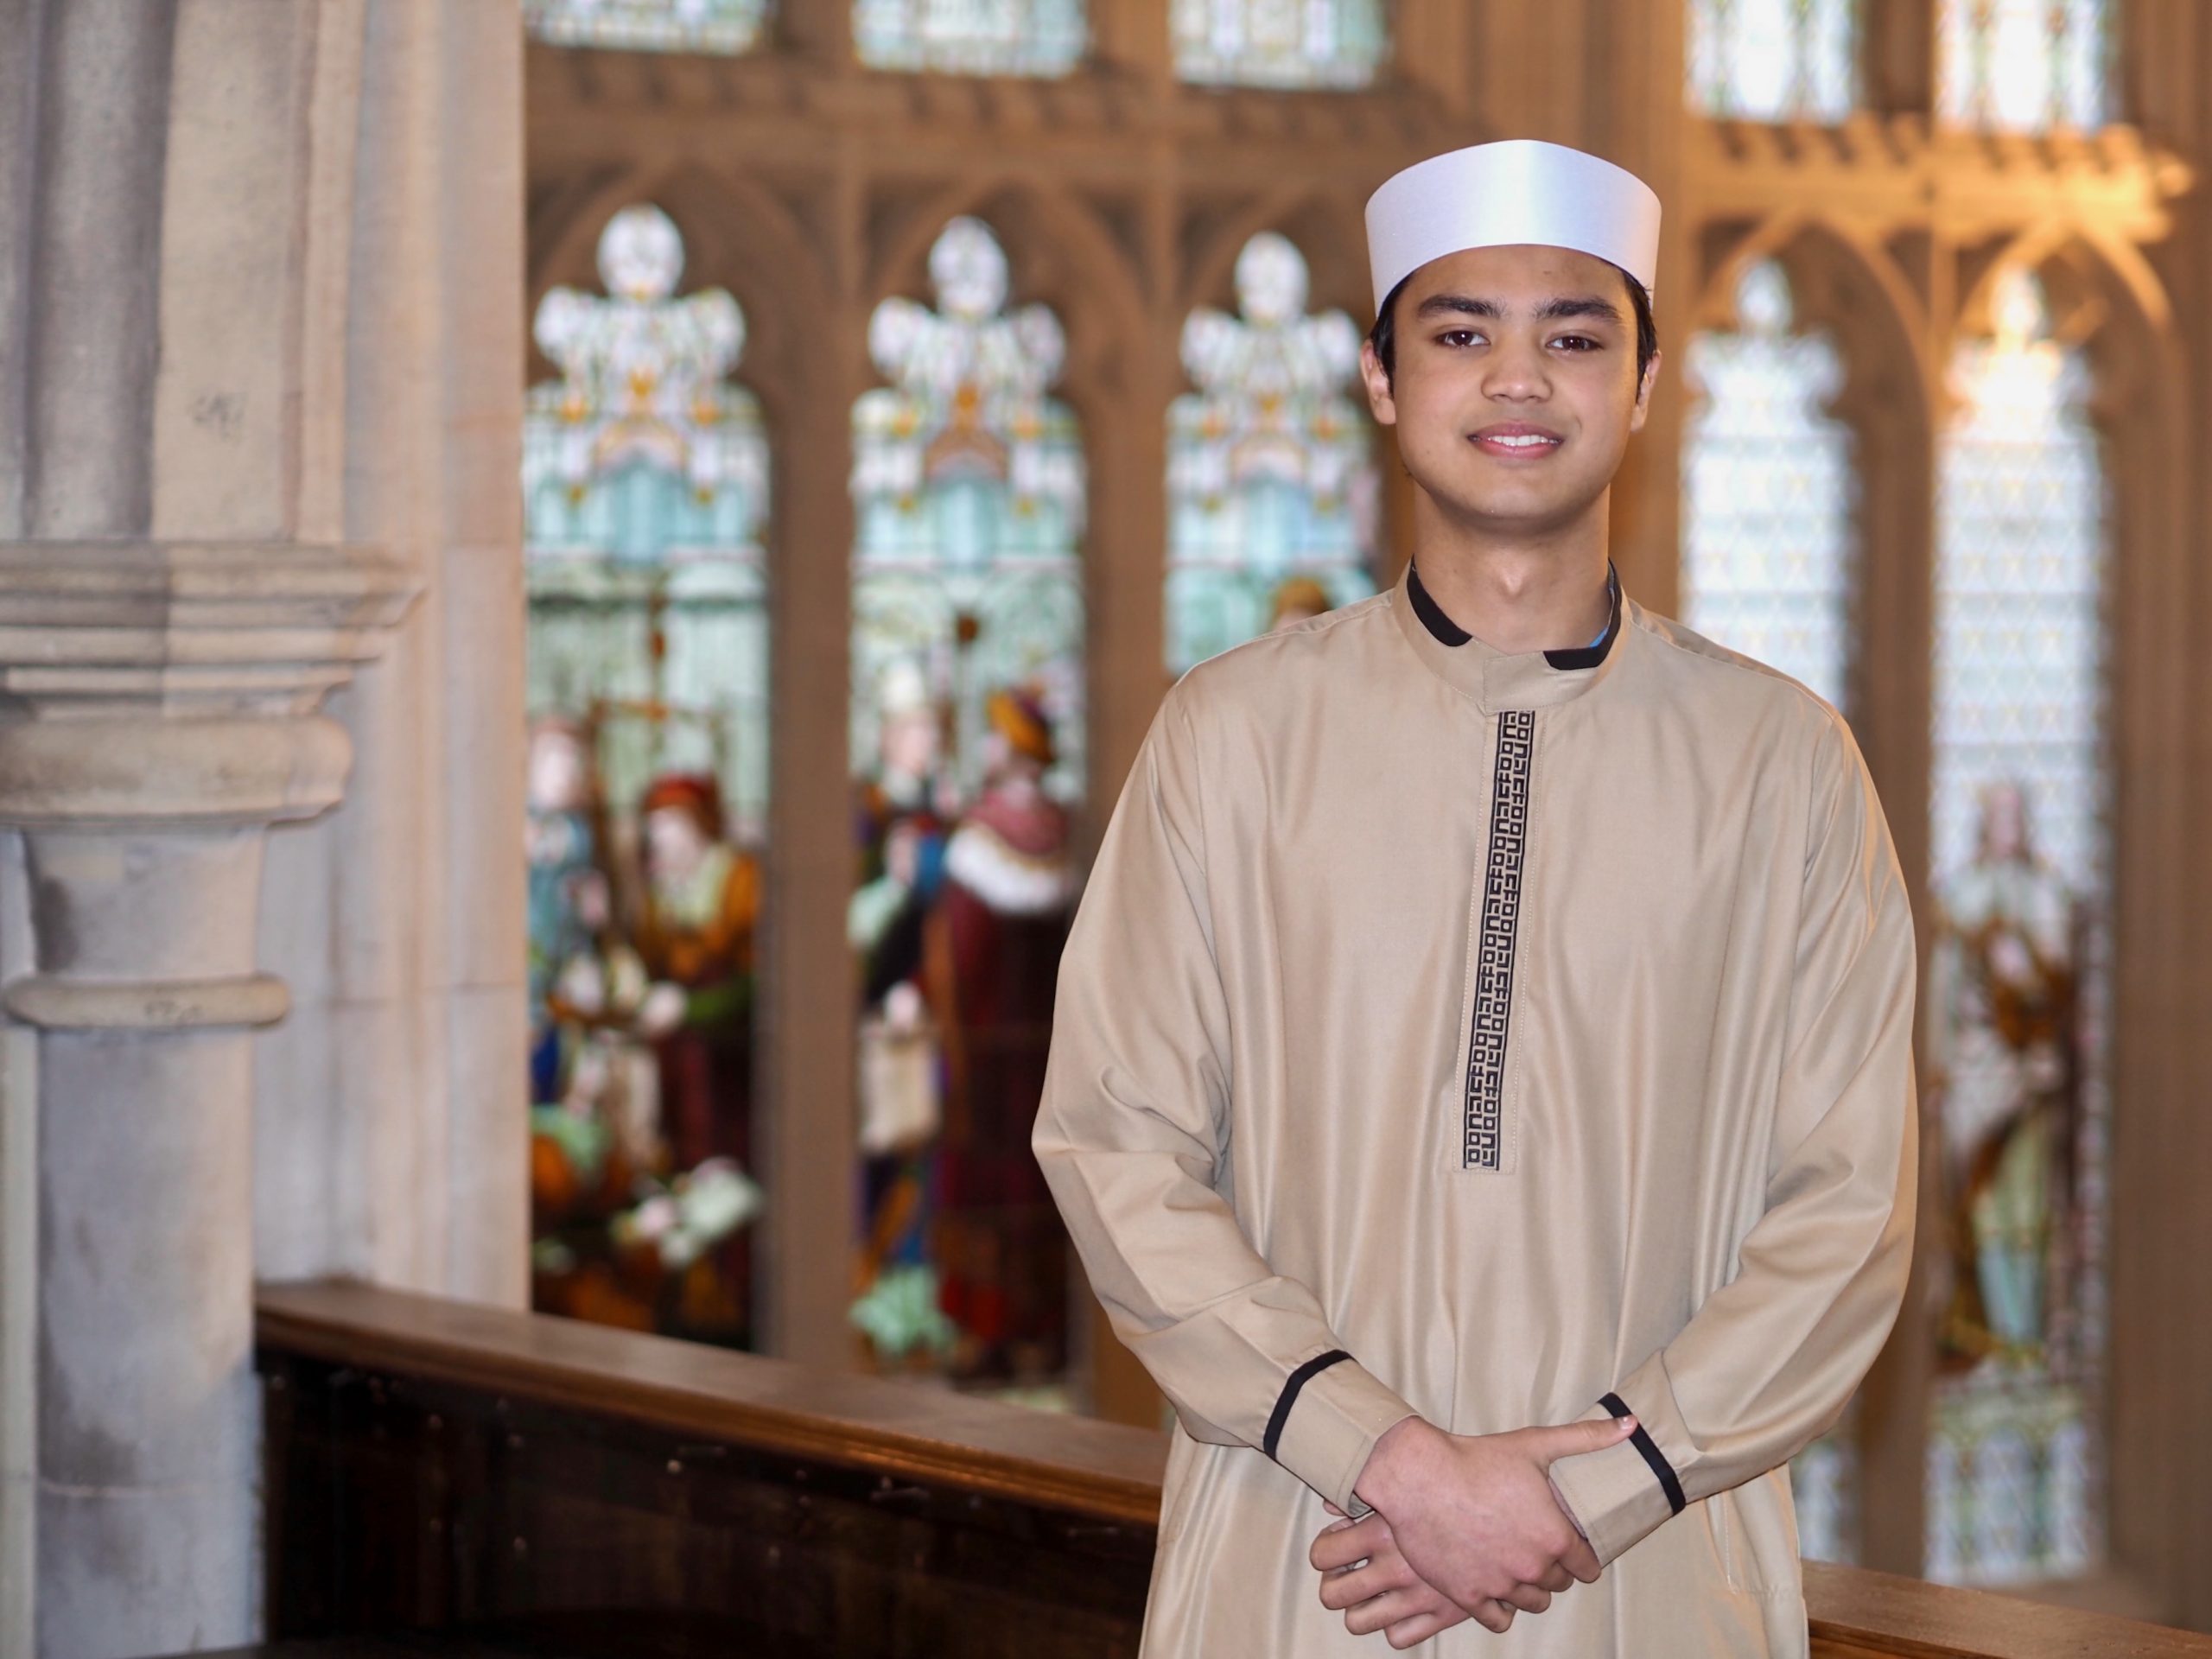 London's Guildhall Old Library Hosts Ramadan Iftar - About Islam